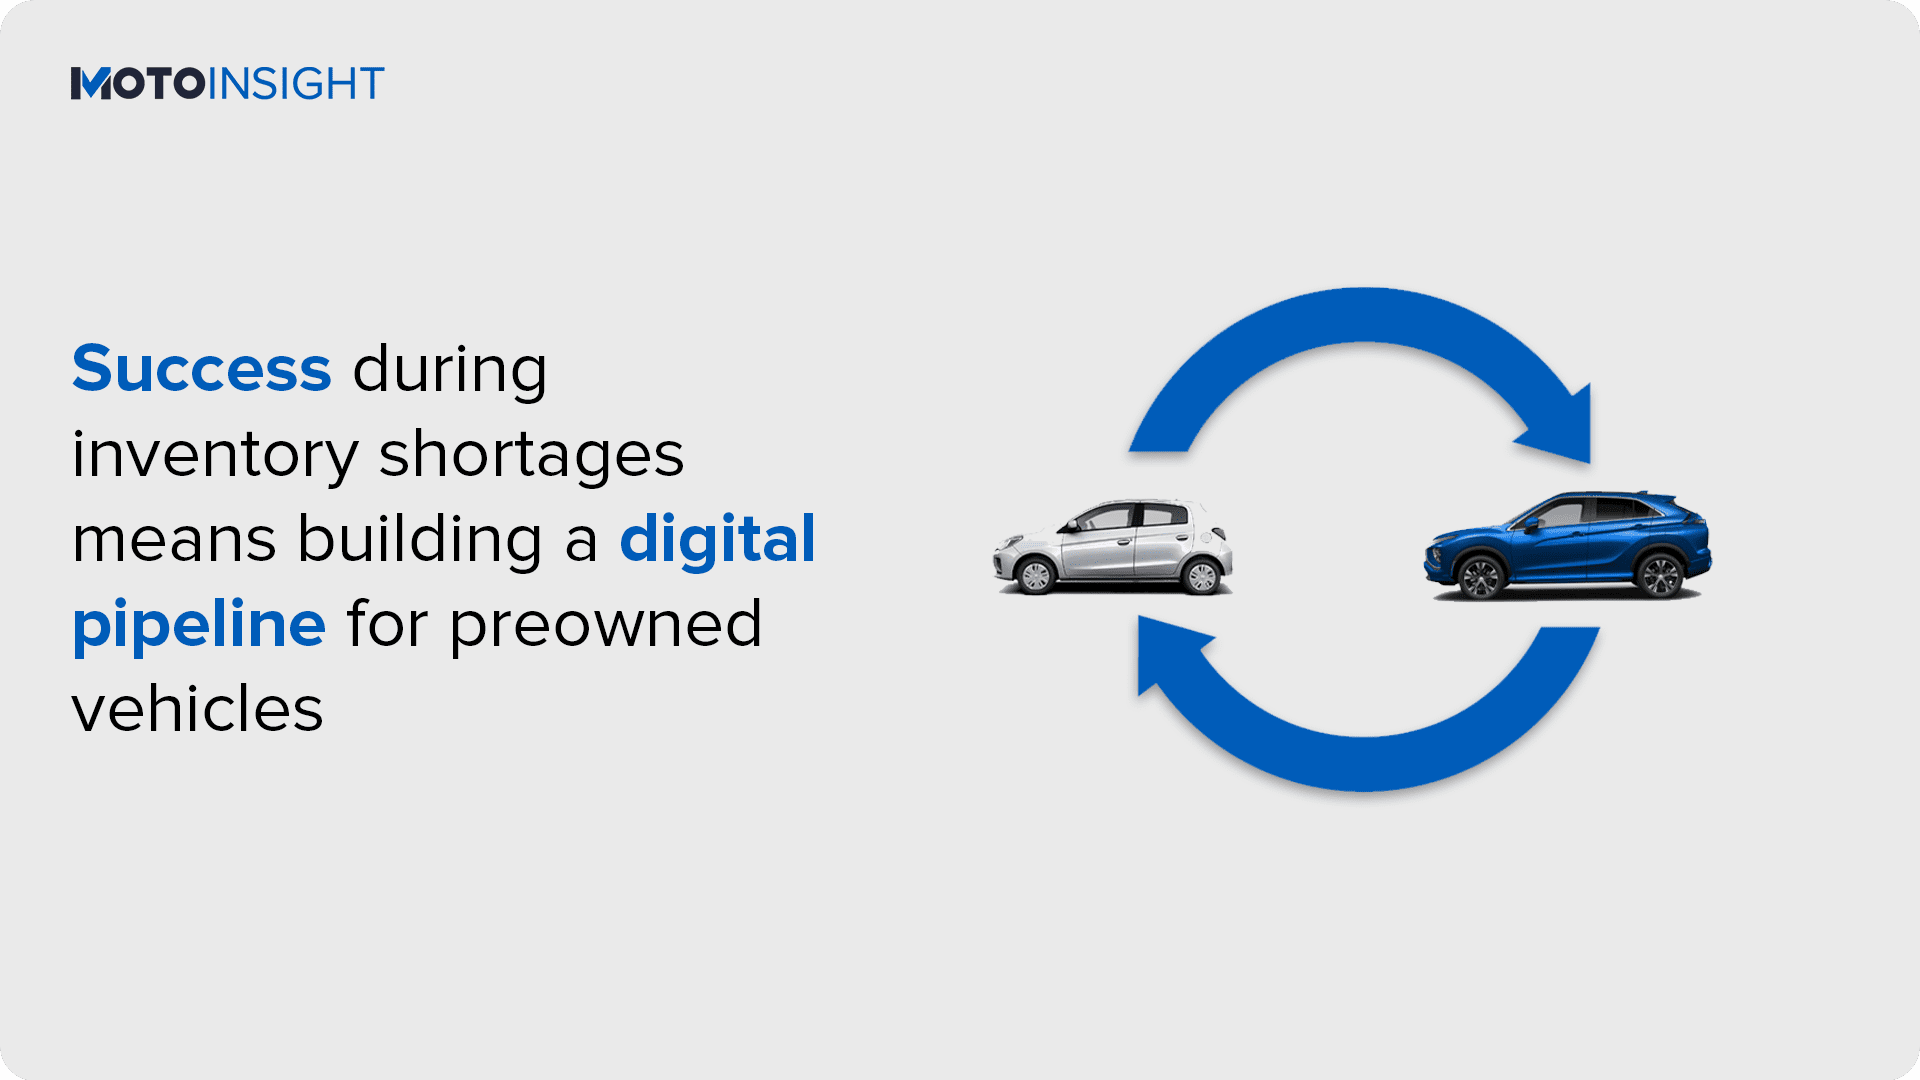 Success during inventory shortages means building a digital pipeline for preowned vehicles